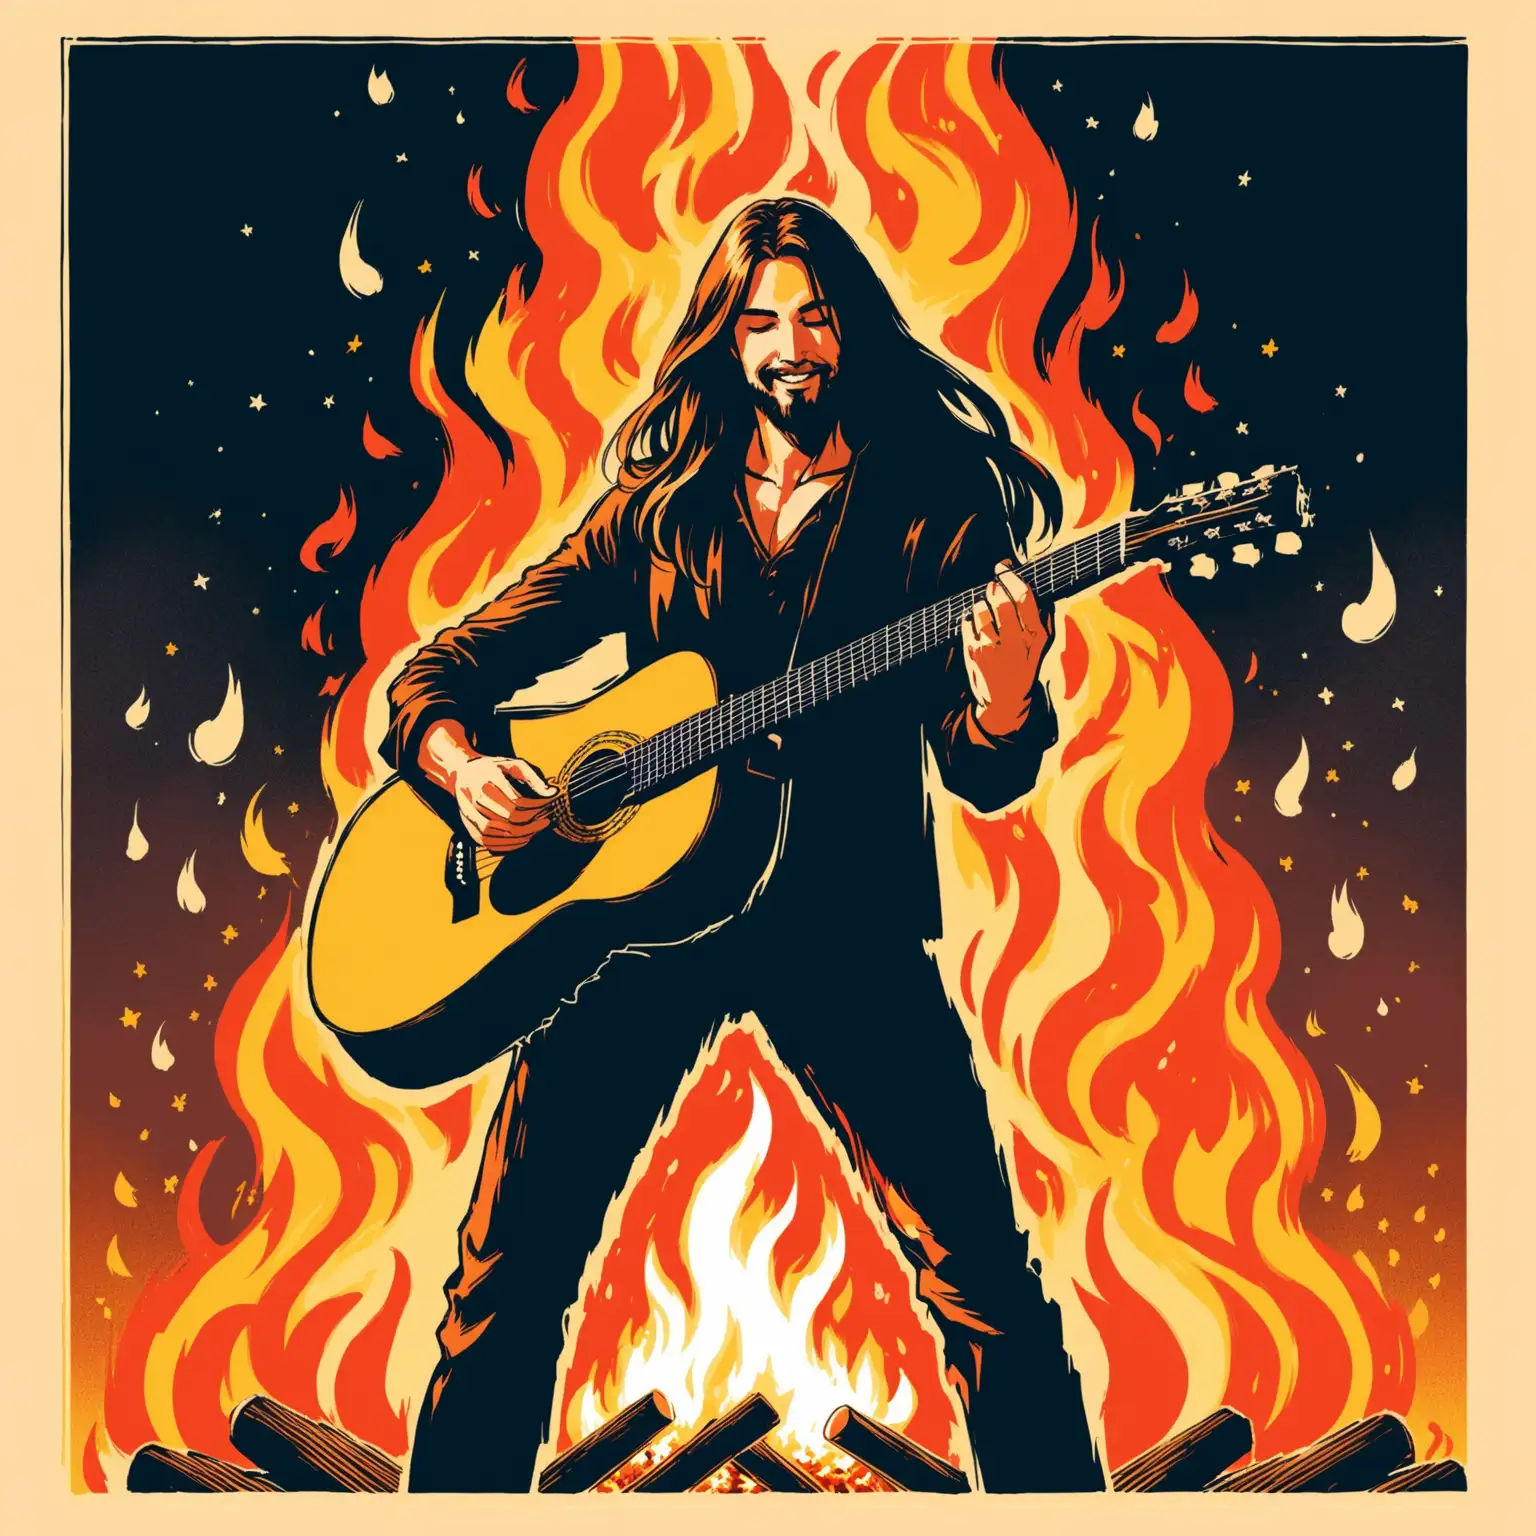 Viewed from somewhat far away - a long haired man by a large bonfire, standing, happily playing guitar - done in a concert poster style